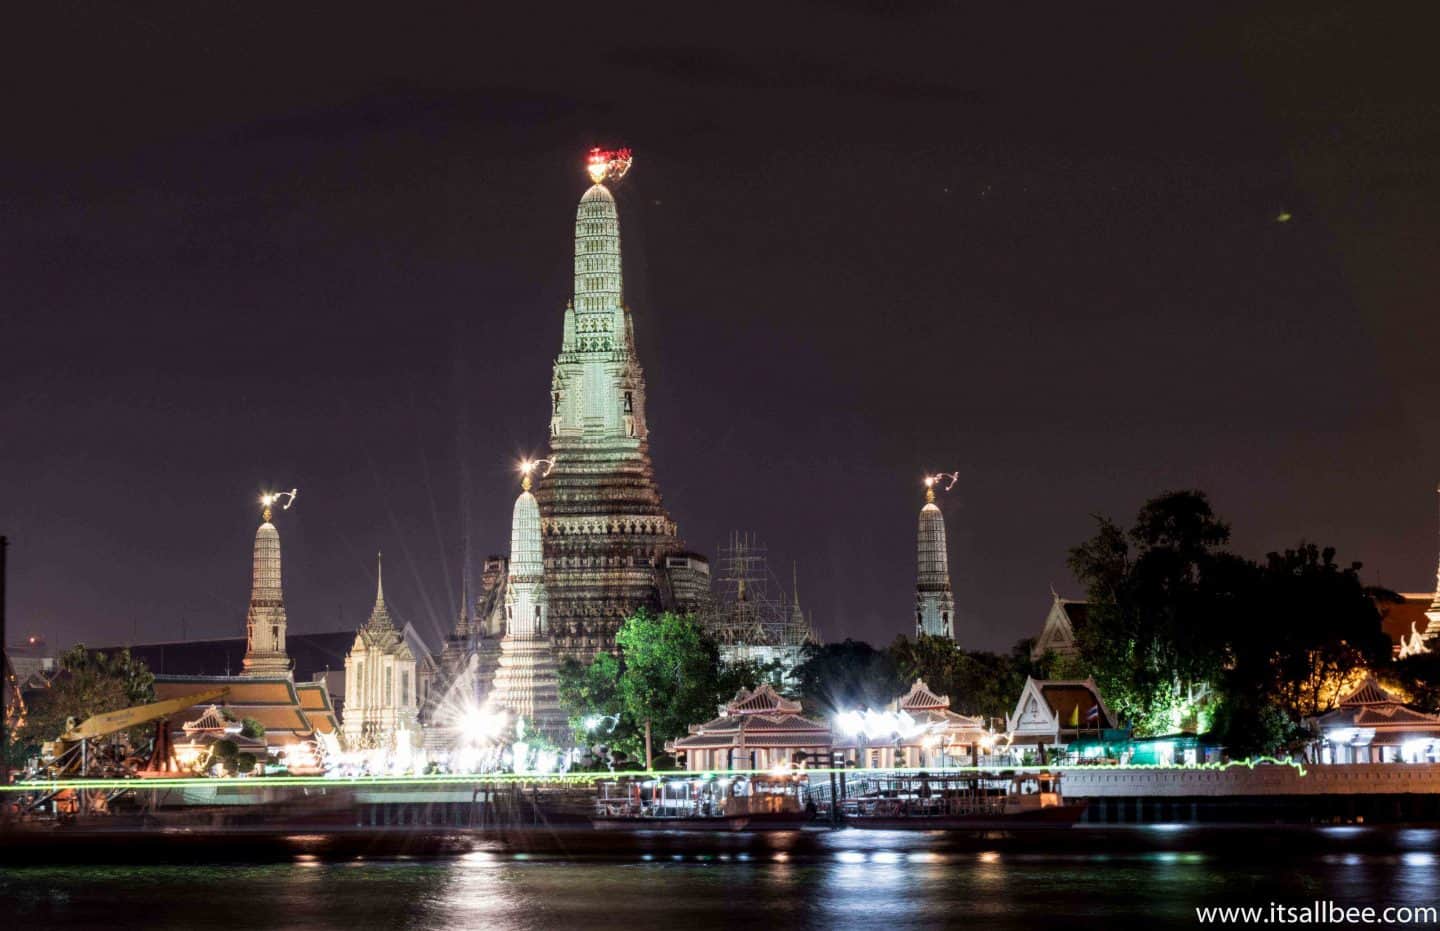 5 Reasons To Visit Bangkok And Why We Fell In Love With The Thai City - Bangkok Travel Guide and Things To Do In Bangkok 